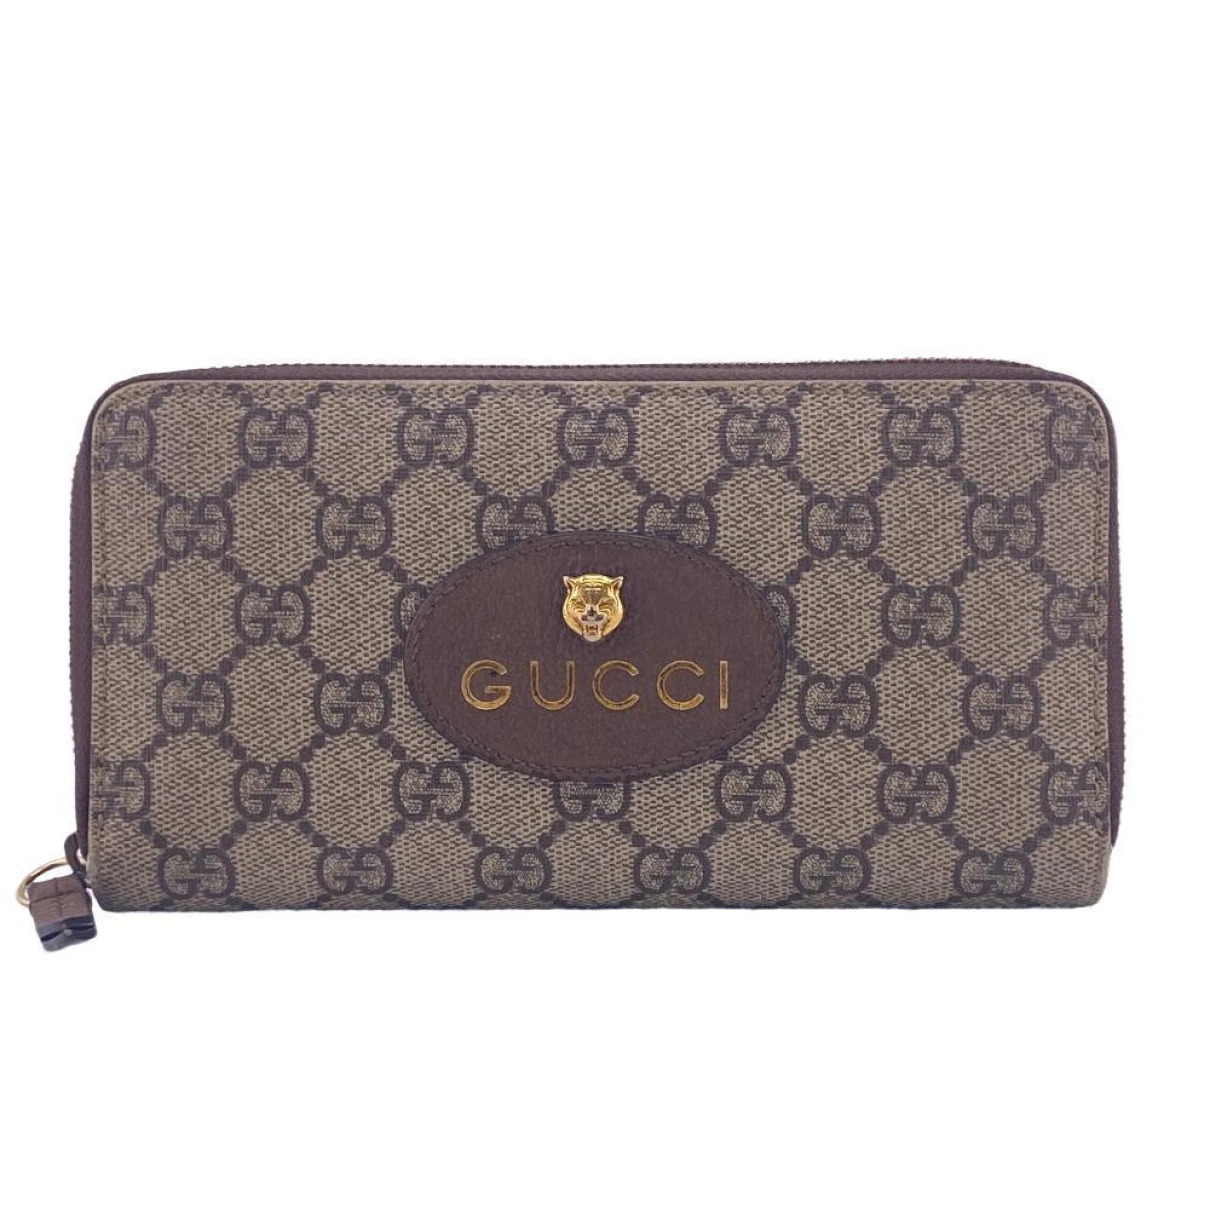 accessories Gucci wallets for Female Cloth. Used condition